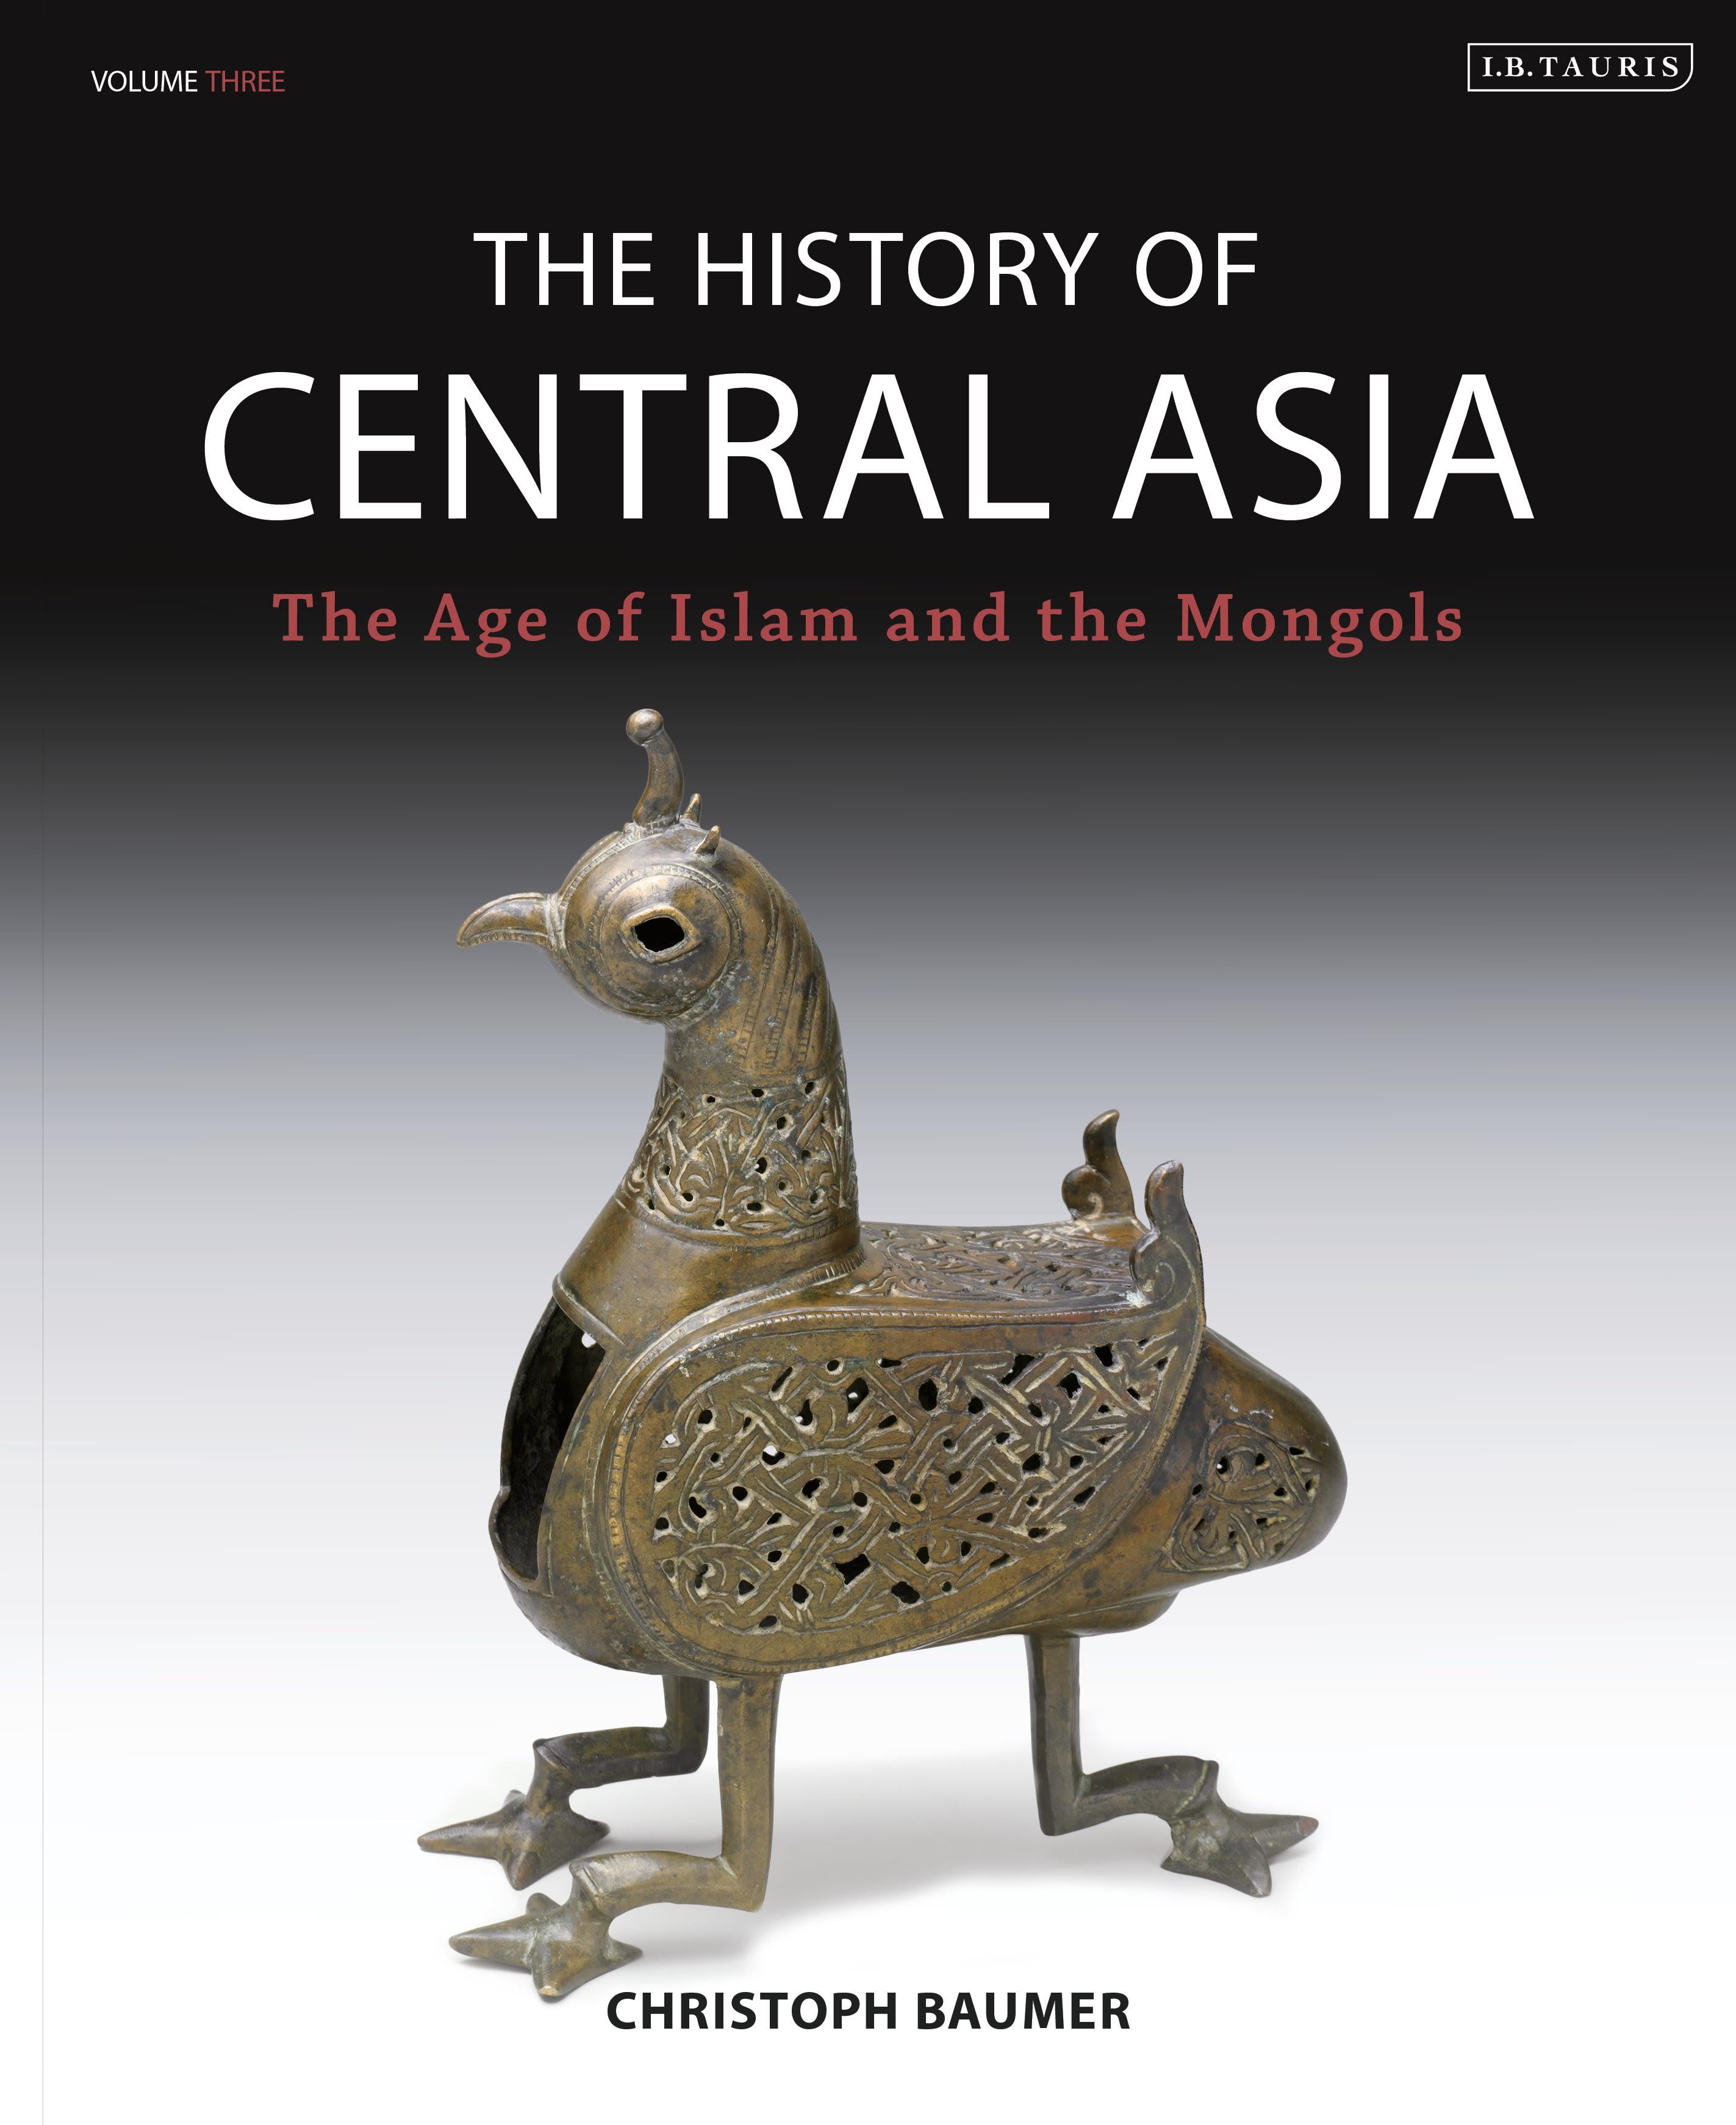 The History of Central Asia / The Age of Islam and the Mongols / Christoph Baumer / Buch / Gebunden / Englisch / 2016 / Bloomsbury Academic / EAN 9781784534905 - Baumer, Christoph